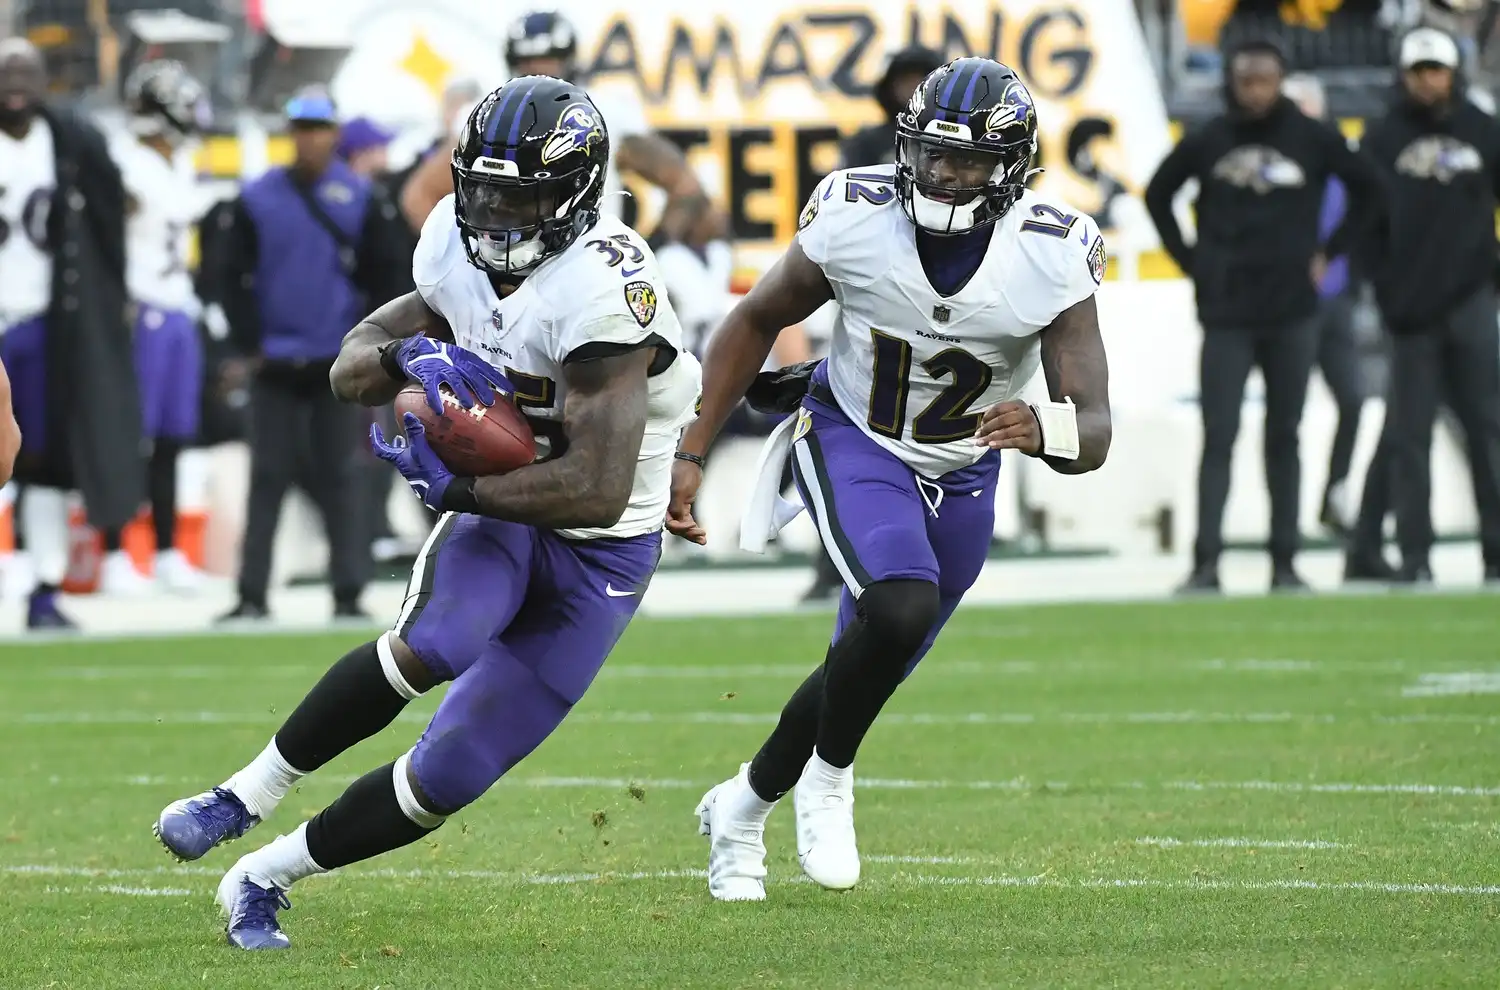 Baltimore Ravens running back Gus Edwards (35) after taking a handoff from quarterback Anthony Brown (12) while playing the Pittsburgh Steelers during the fourth quarter at Acrisure Stadium. The Steelers lost 16-14. Mandatory Credit: Philip G. Pavely-USA TODAY Sports